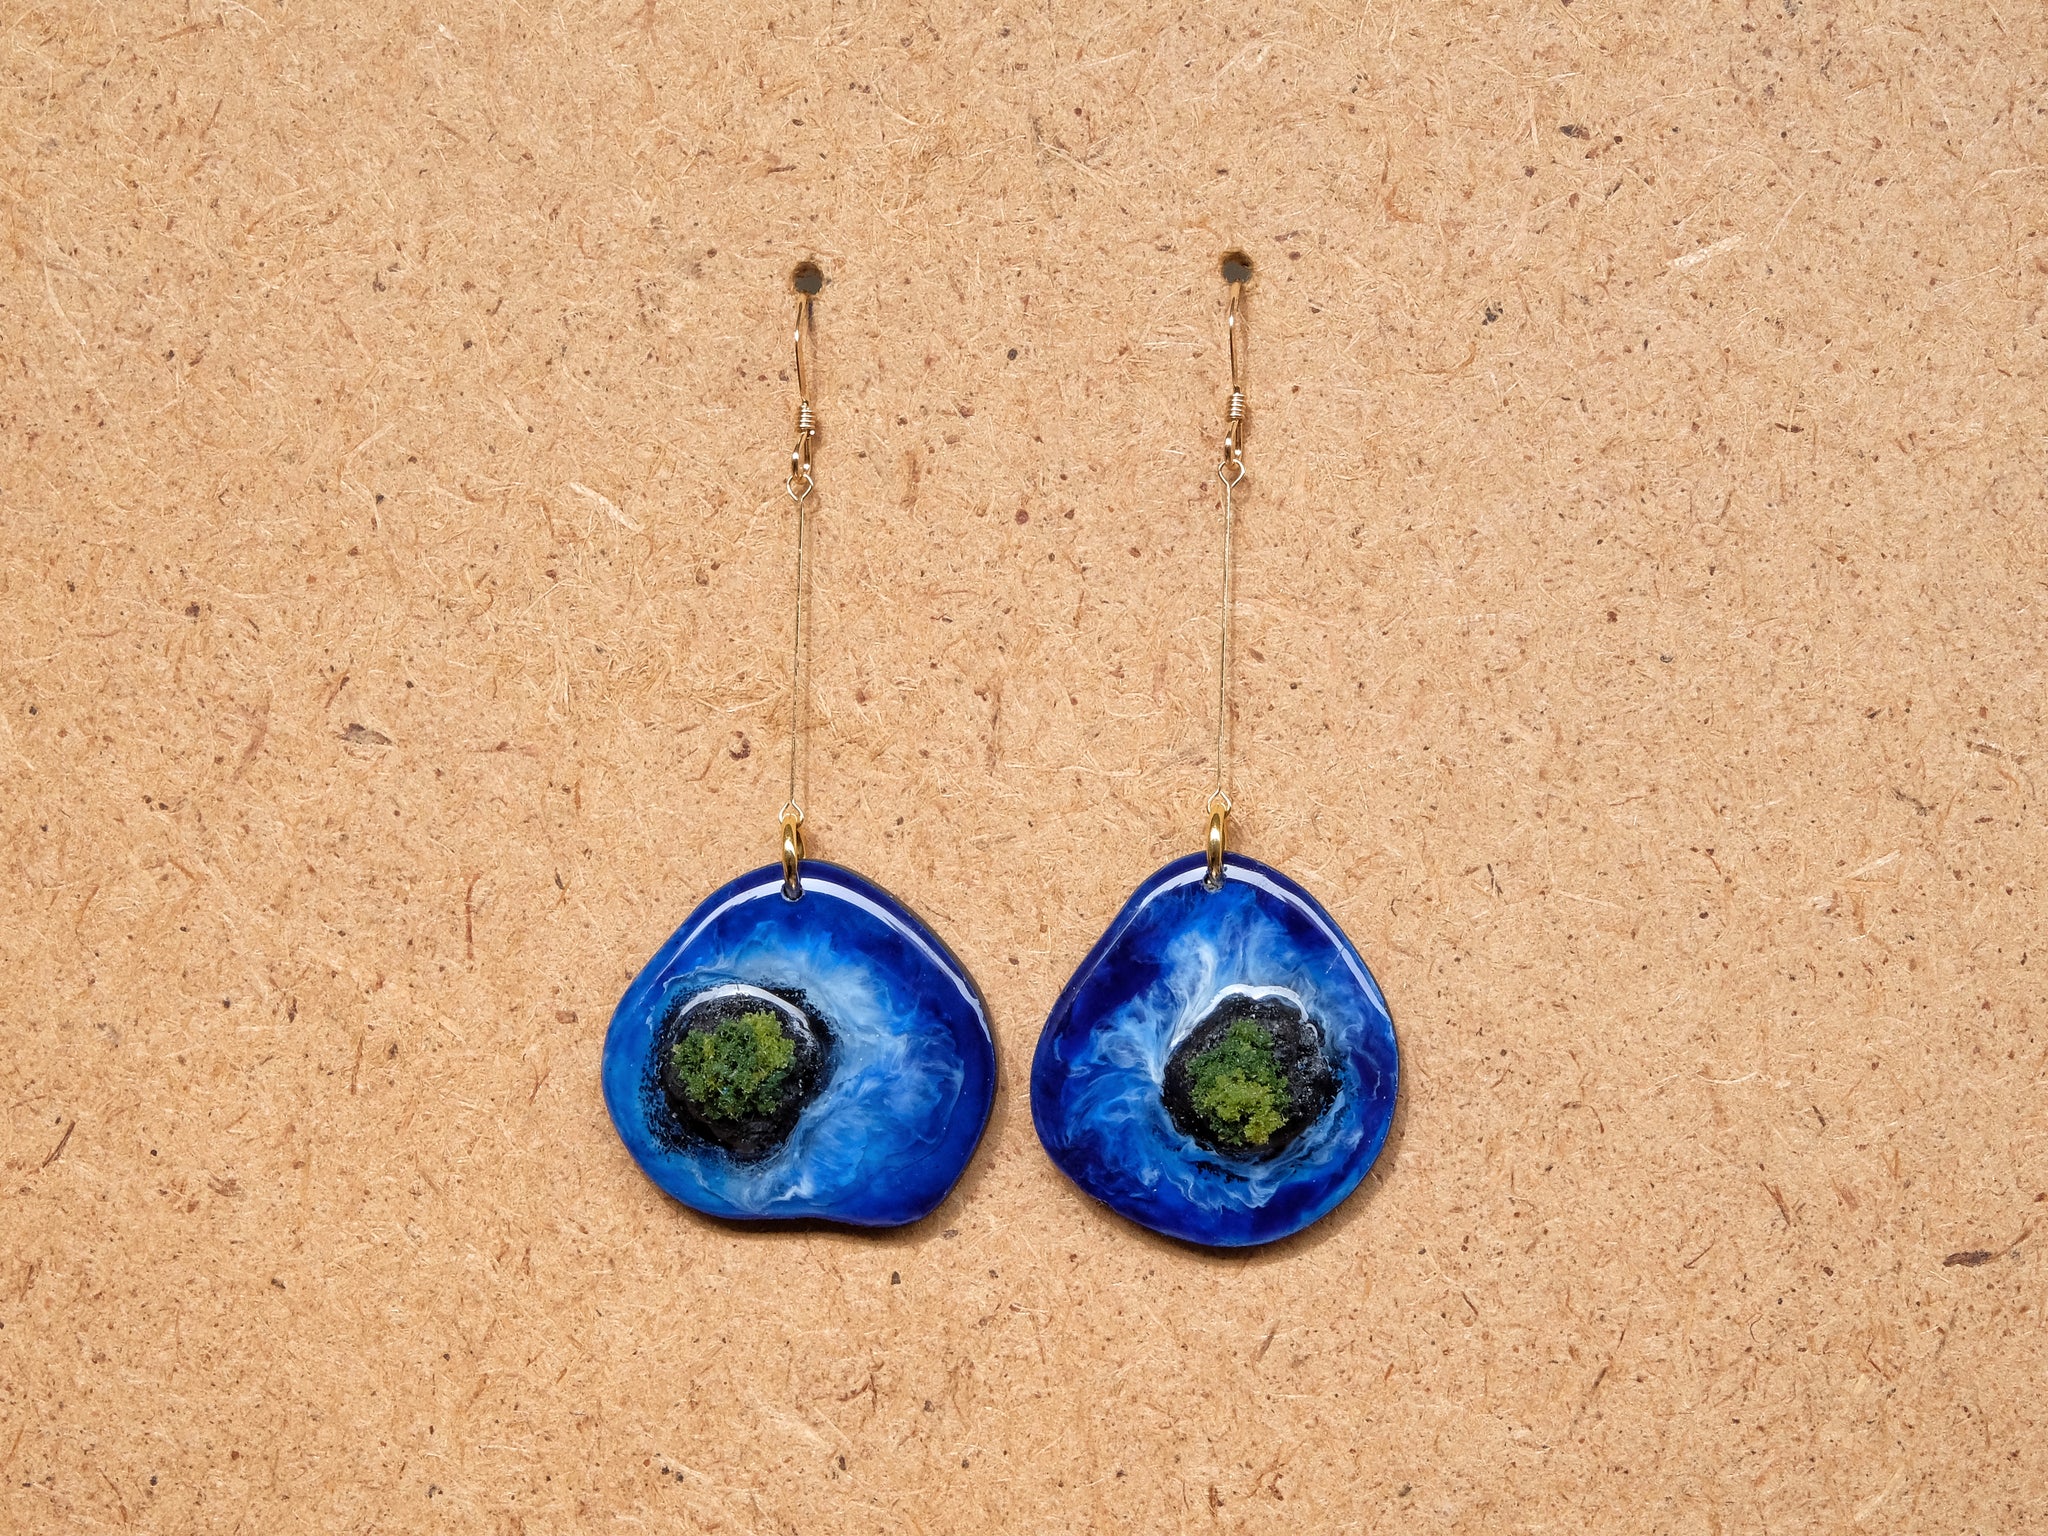 Island Earrings Collection: Blue on Black #2